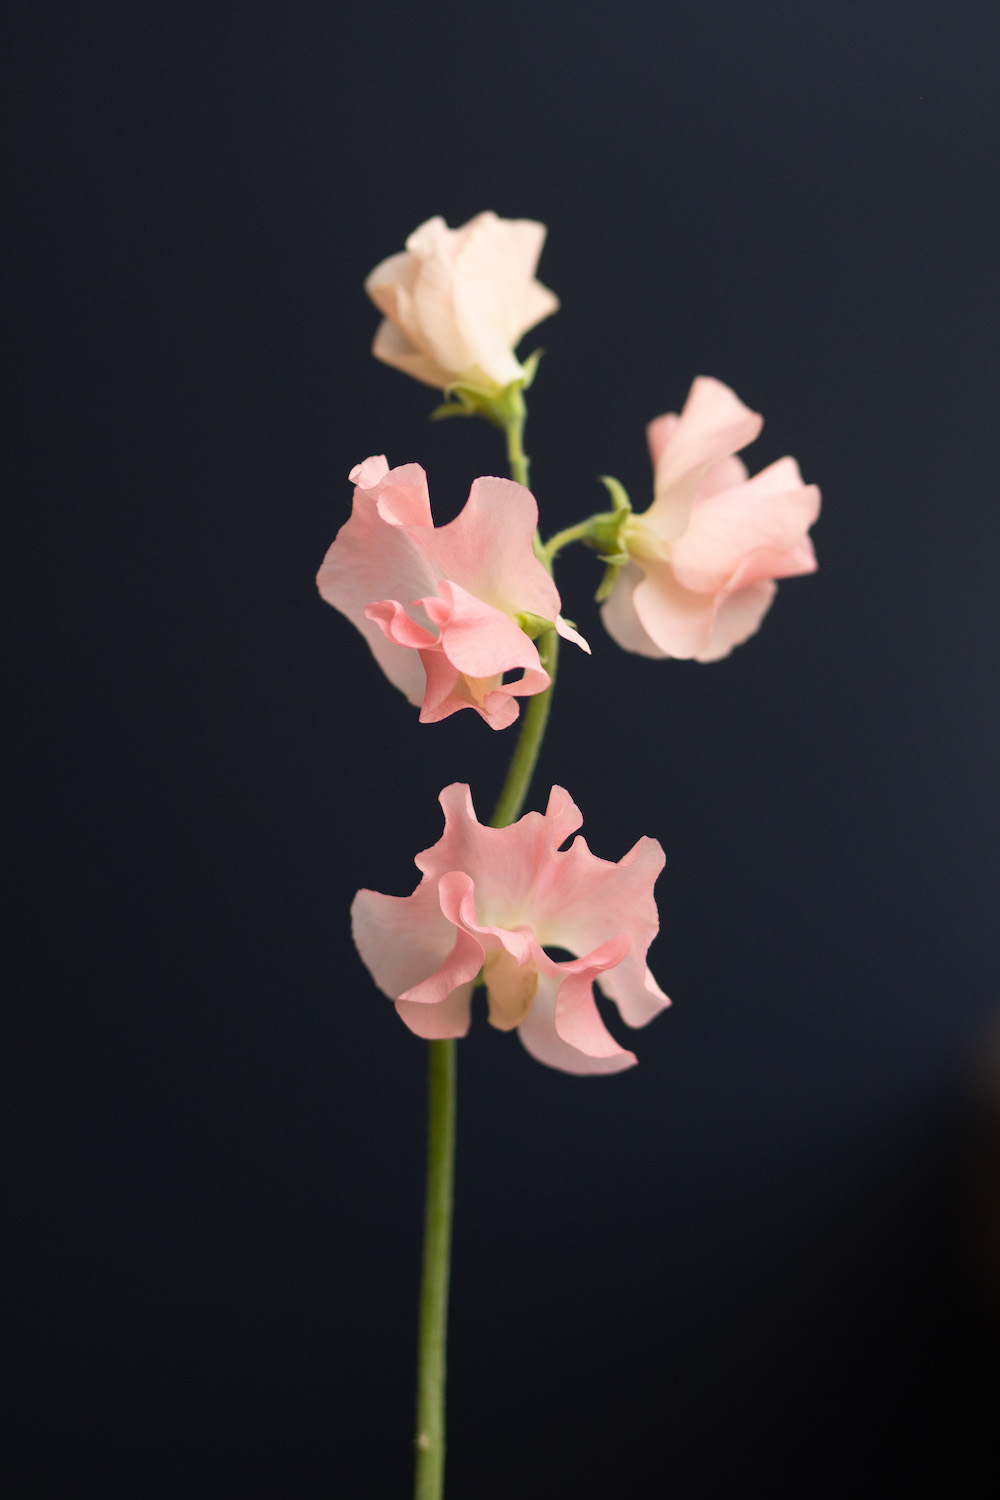 A Floral Shoot With Colorful Lathyrus002